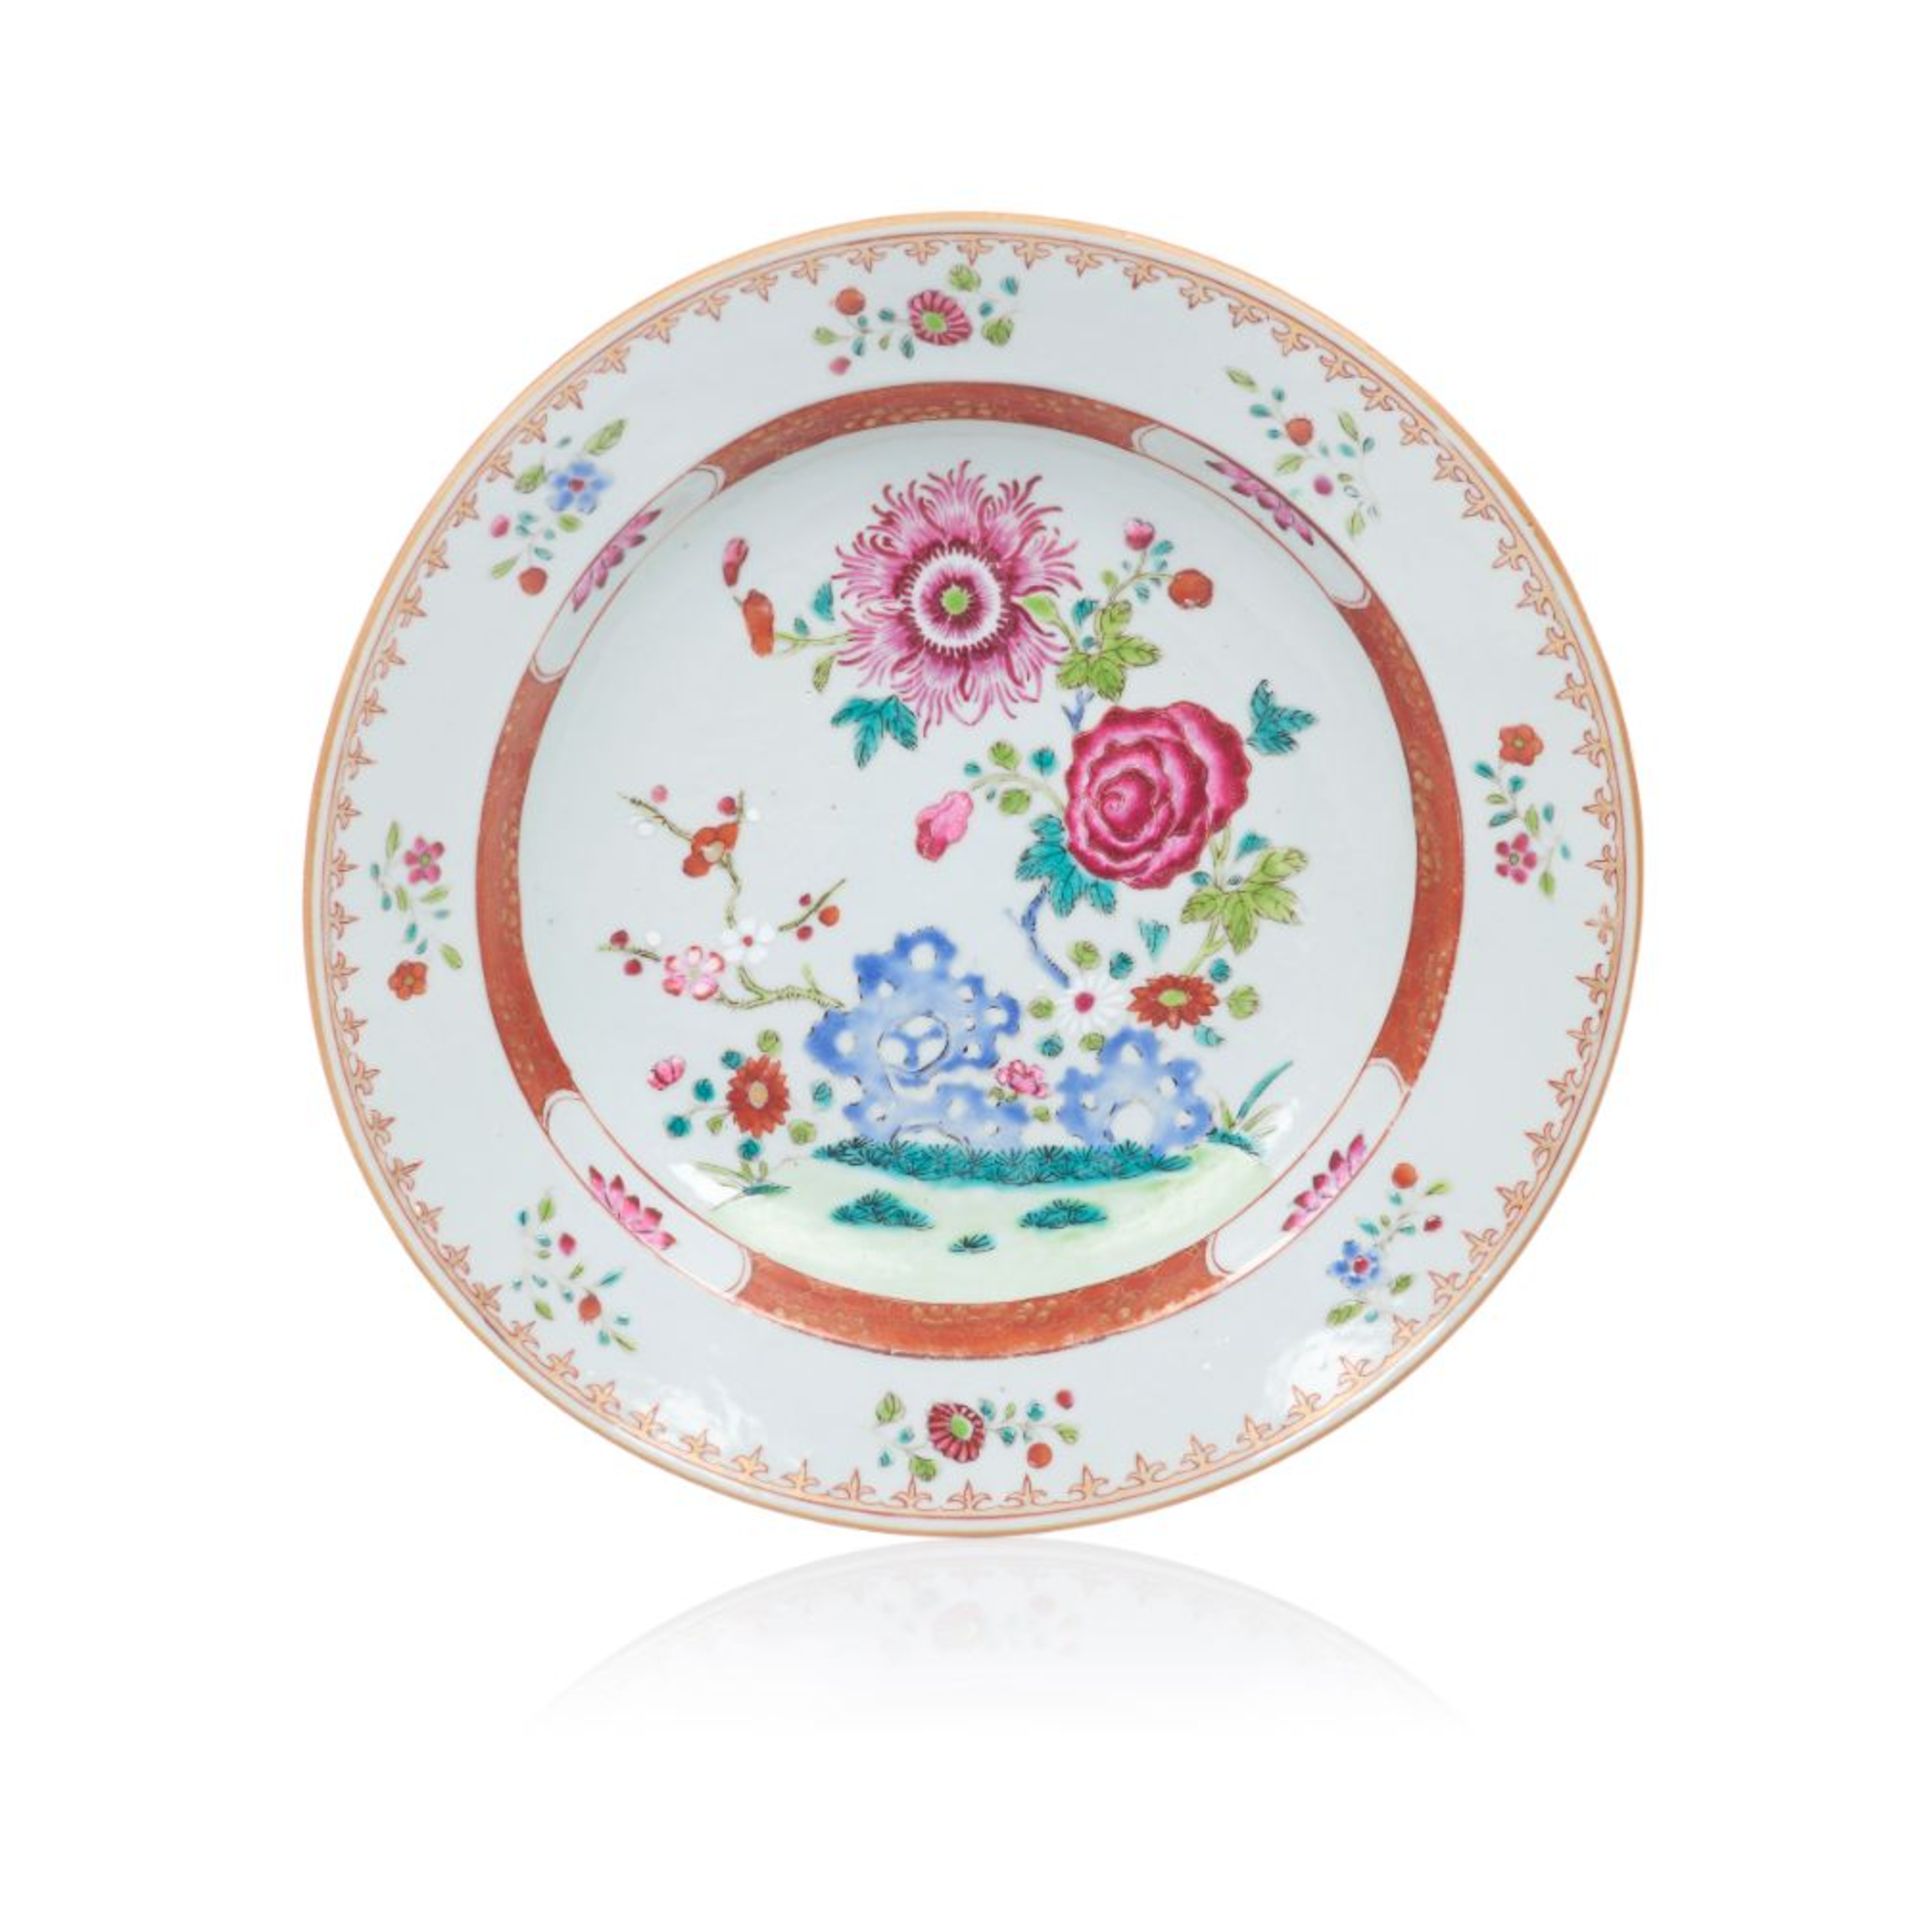 A deep plate, Chinese export porcelain, Polychrome "Famille Rose" enamelled and iron oxide